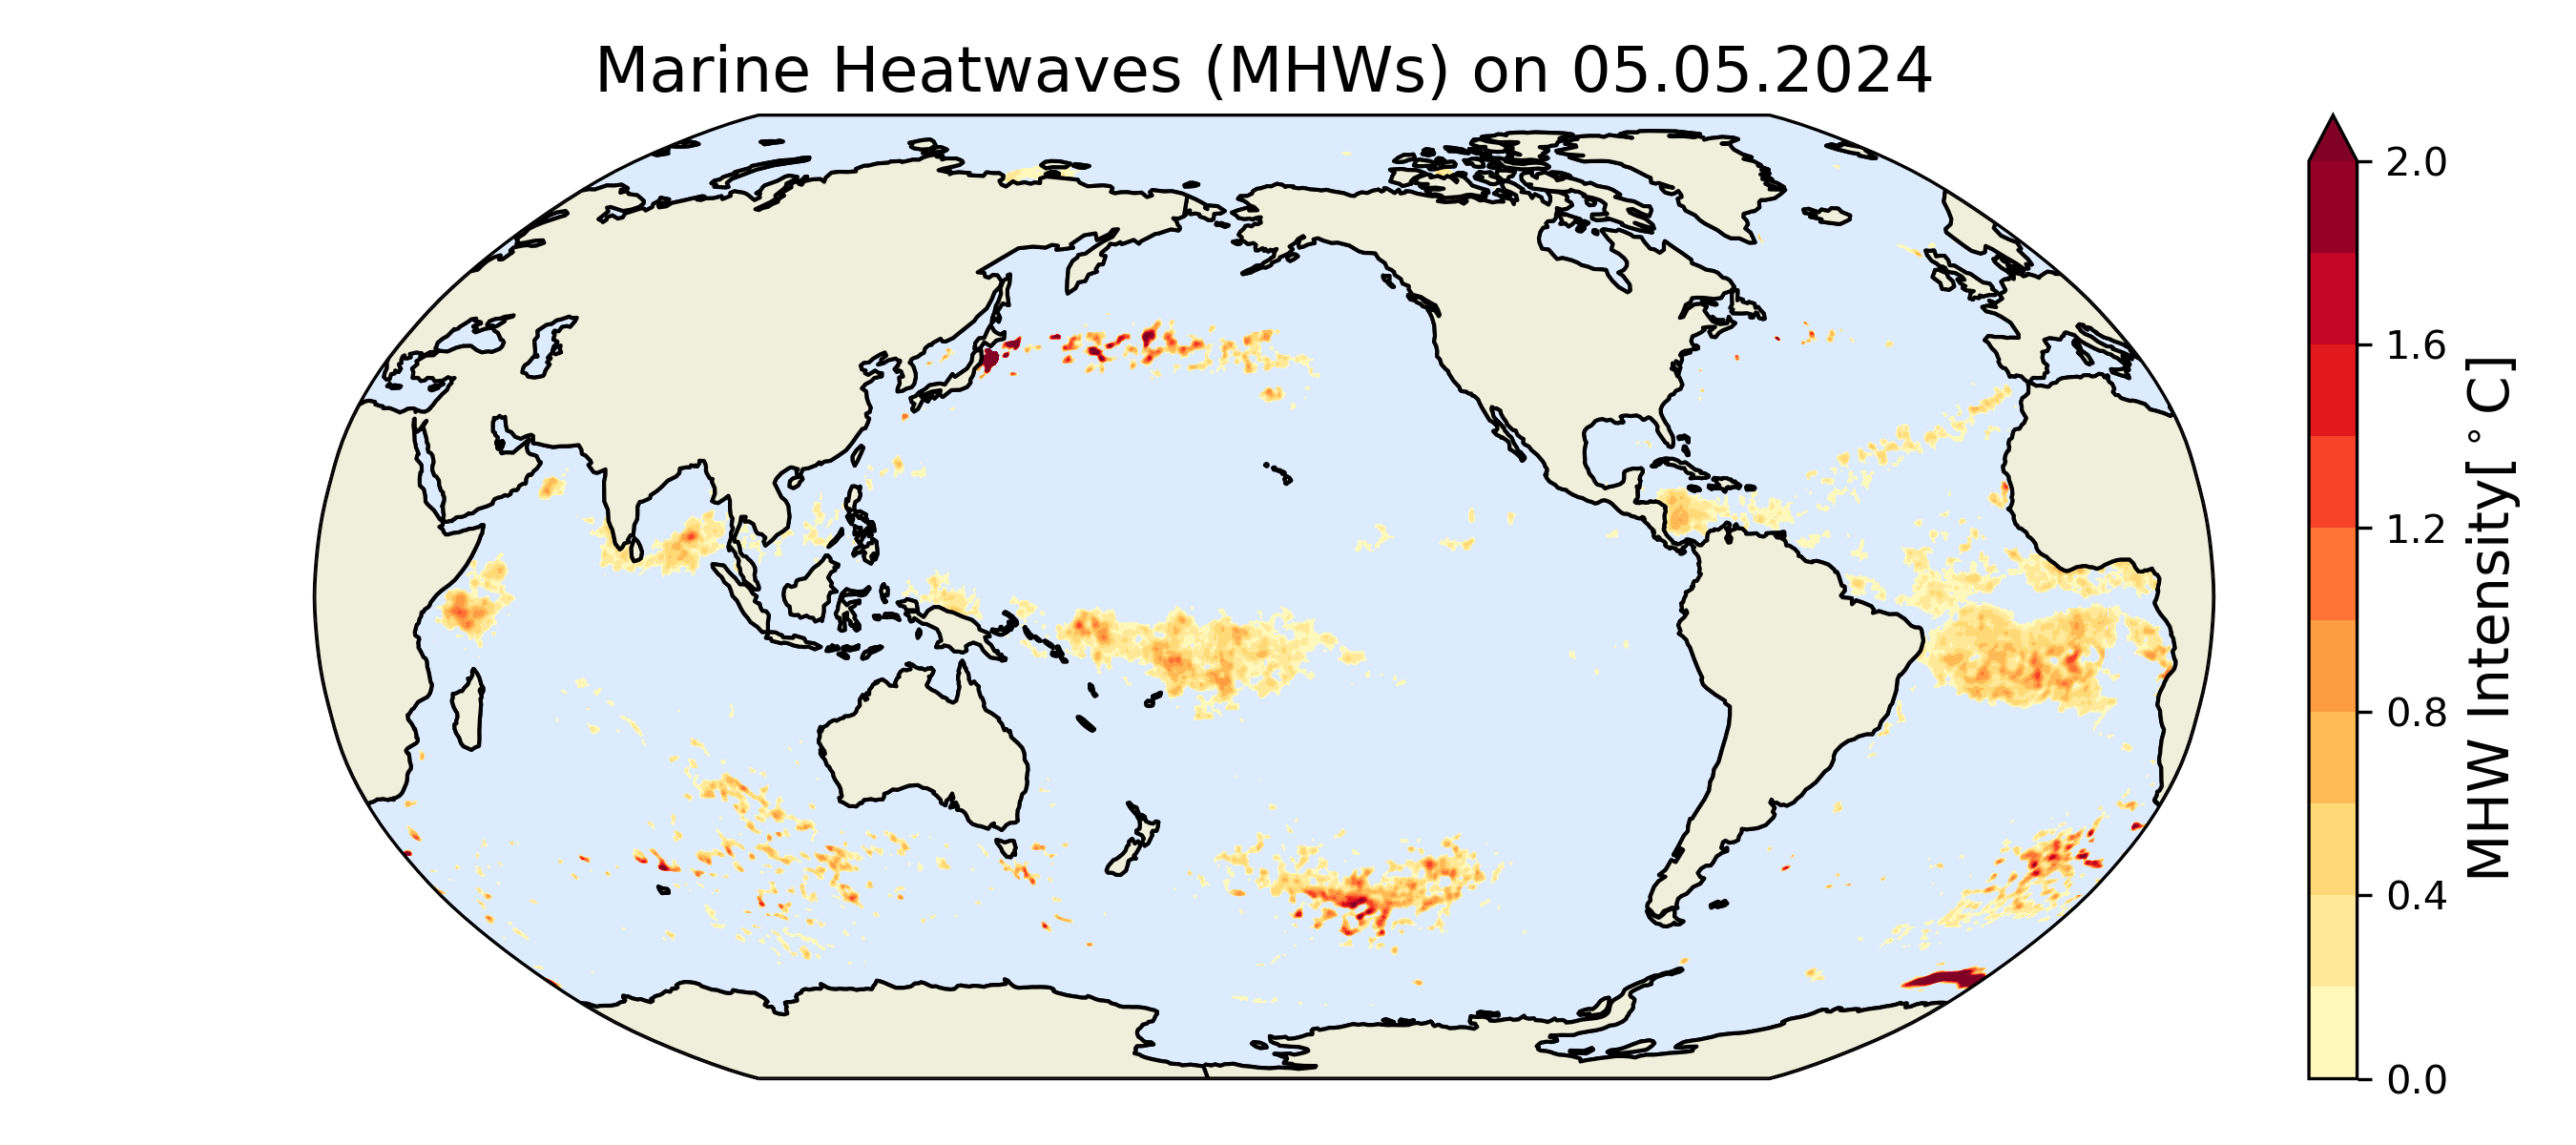 Location of the most recent marine heatwaves on a map of the globe